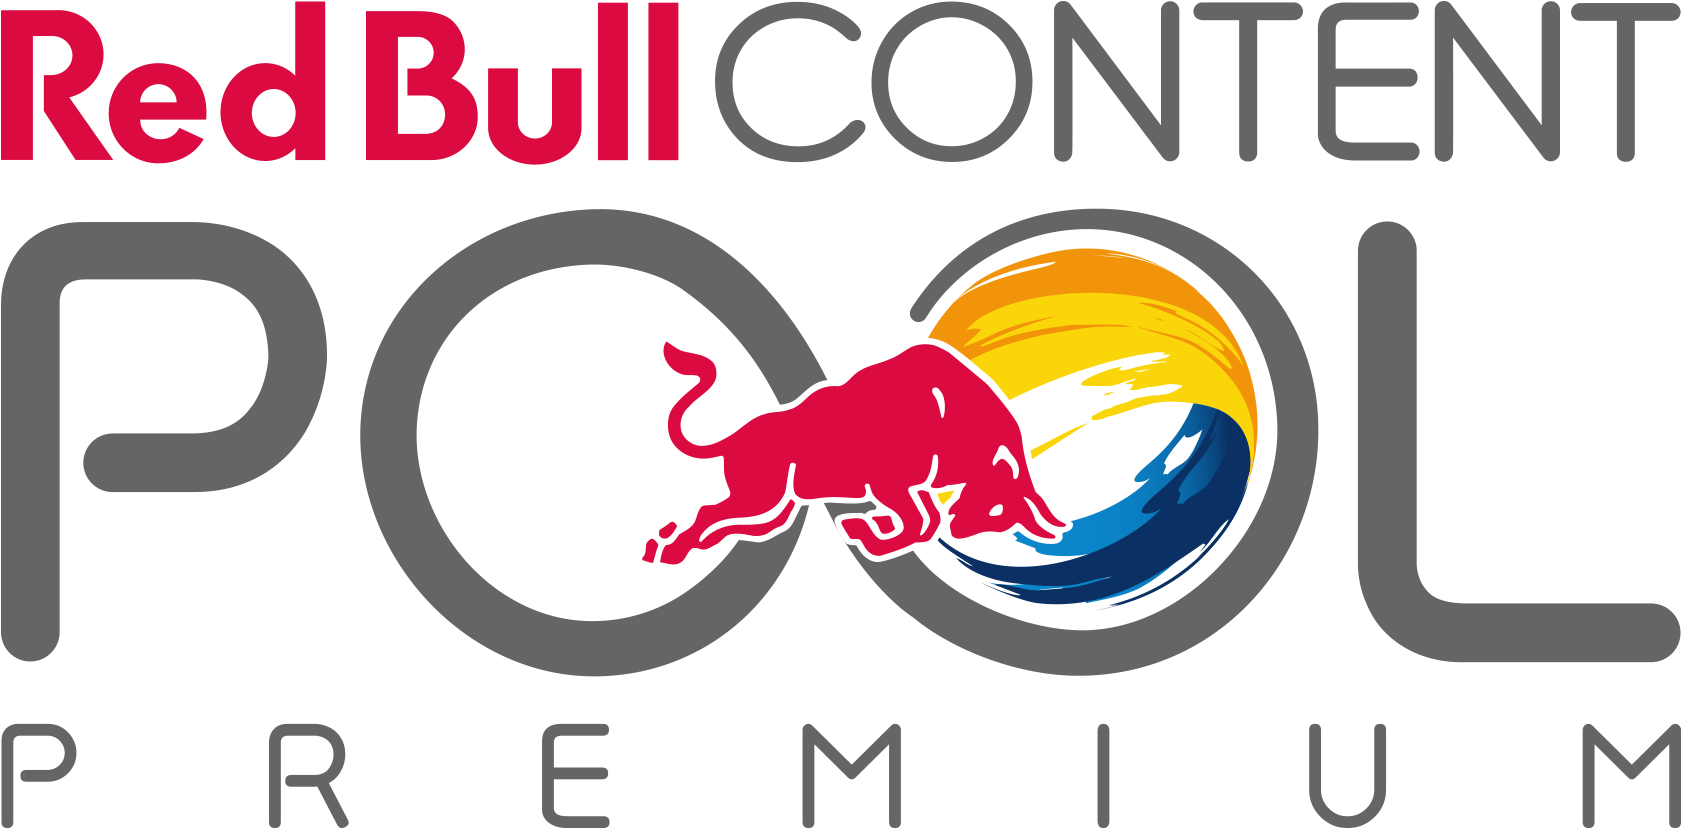 Download Our Network Red Bull Content Pool Logo Png Image With No Background Pngkey Com